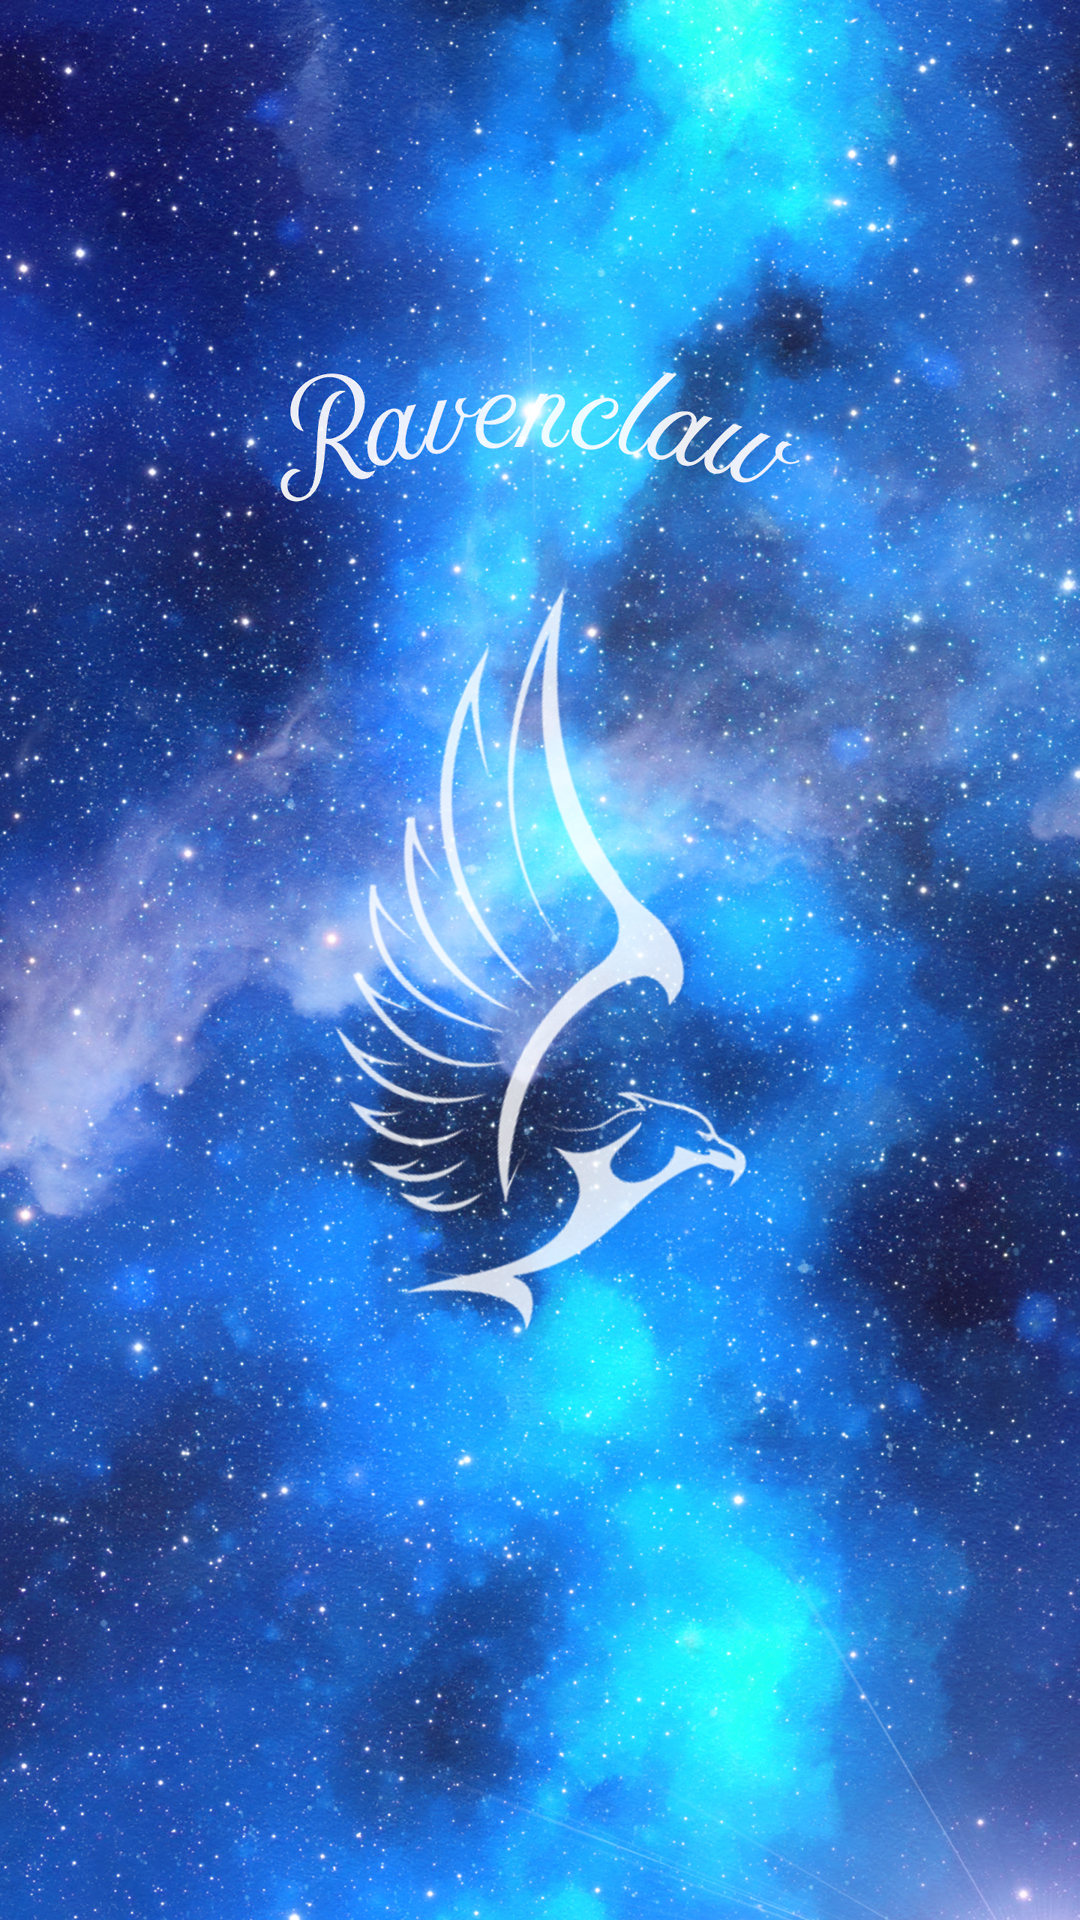 1080x1920 Harry Potter Ravenclaw Phone Wallpapers Top Free Harry Potter Ravenclaw Phone Backgrounds